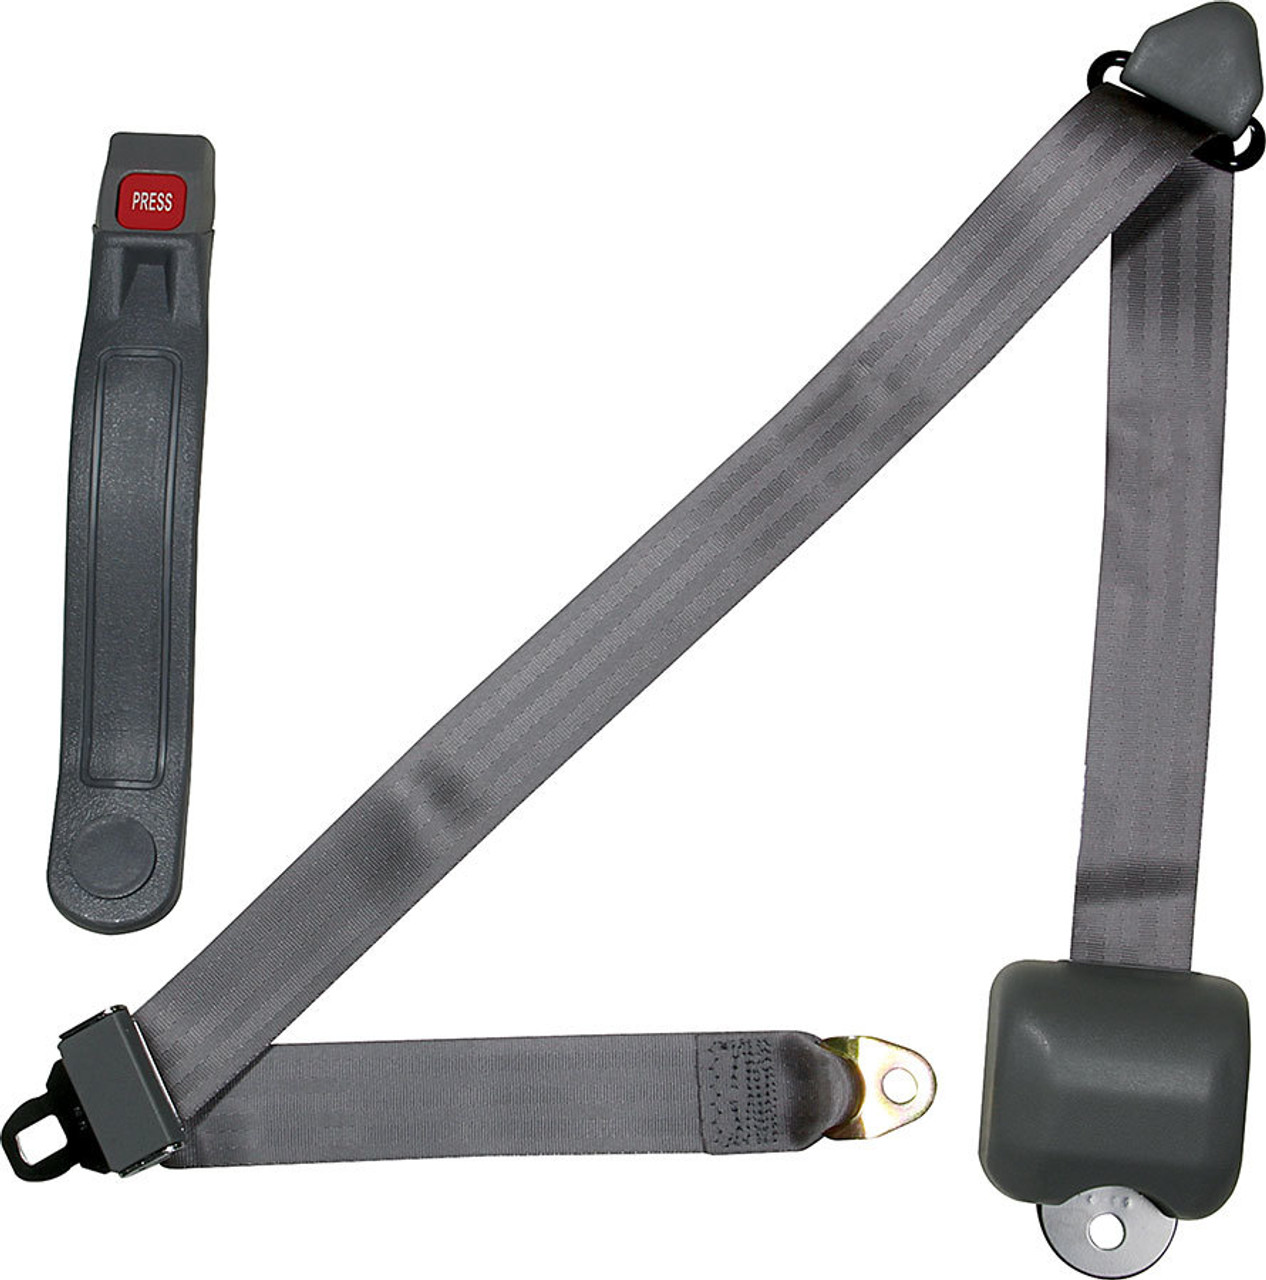 Overall length of belt completely extended is 132(11ft) from base of retractor to mounting  length of belt is about 48 from base of retractor to end of belt mounting point. Overall length of the rigid plastic unit is 13.Installation hardware sold separately (ALL98121)